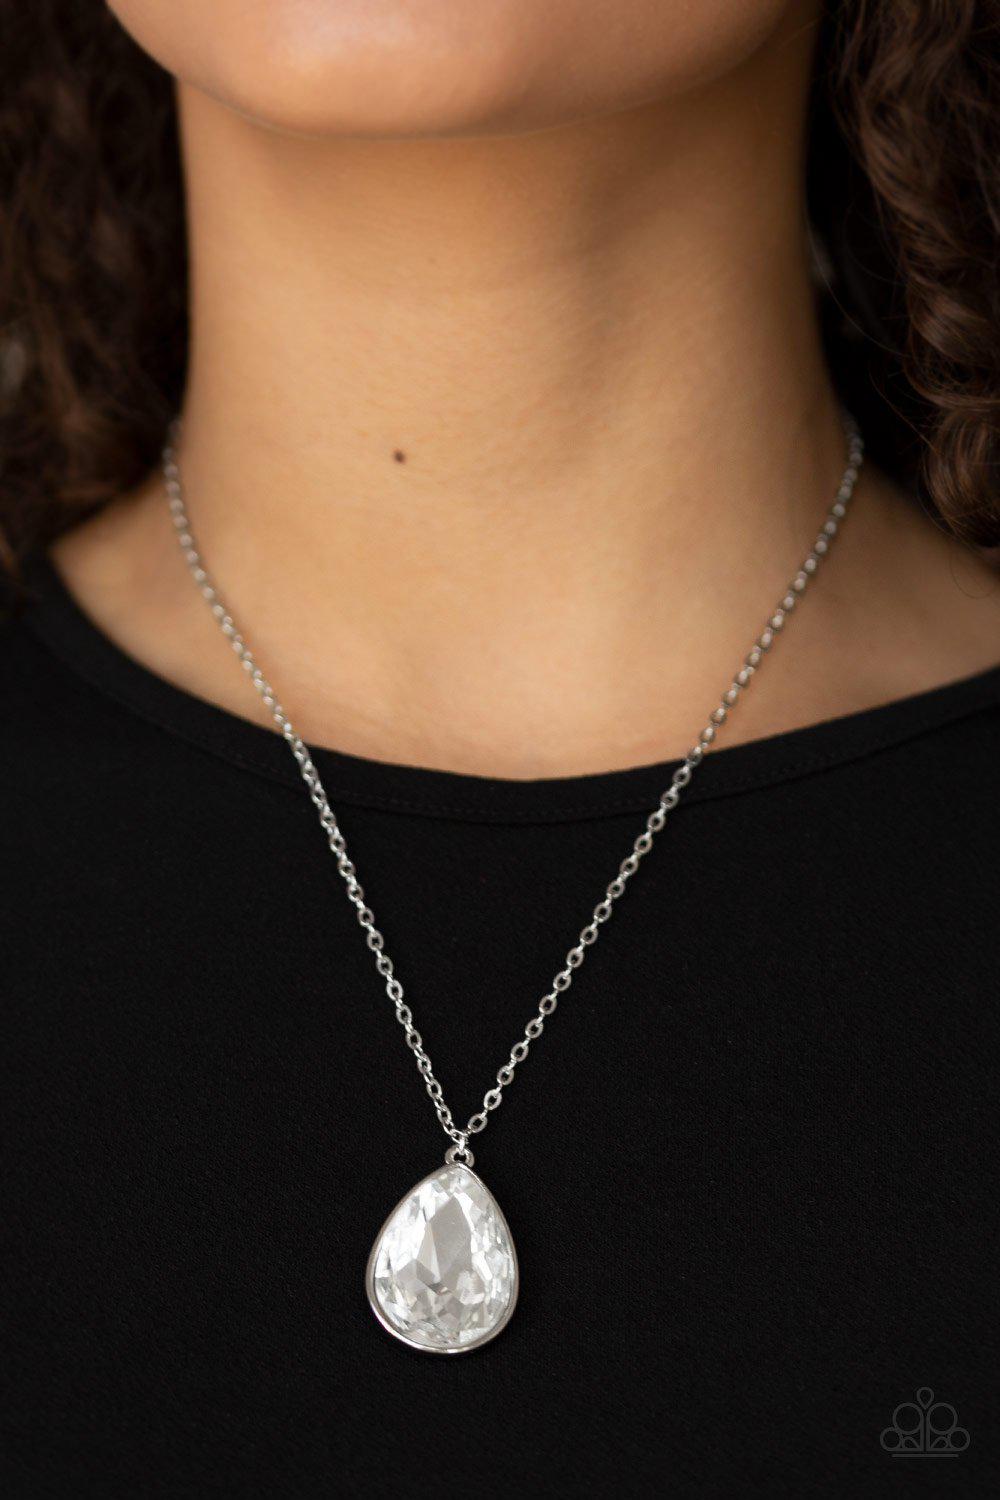 So Obvious White Teardrop Rhinestone Necklace - Paparazzi Accessories-CarasShop.com - $5 Jewelry by Cara Jewels